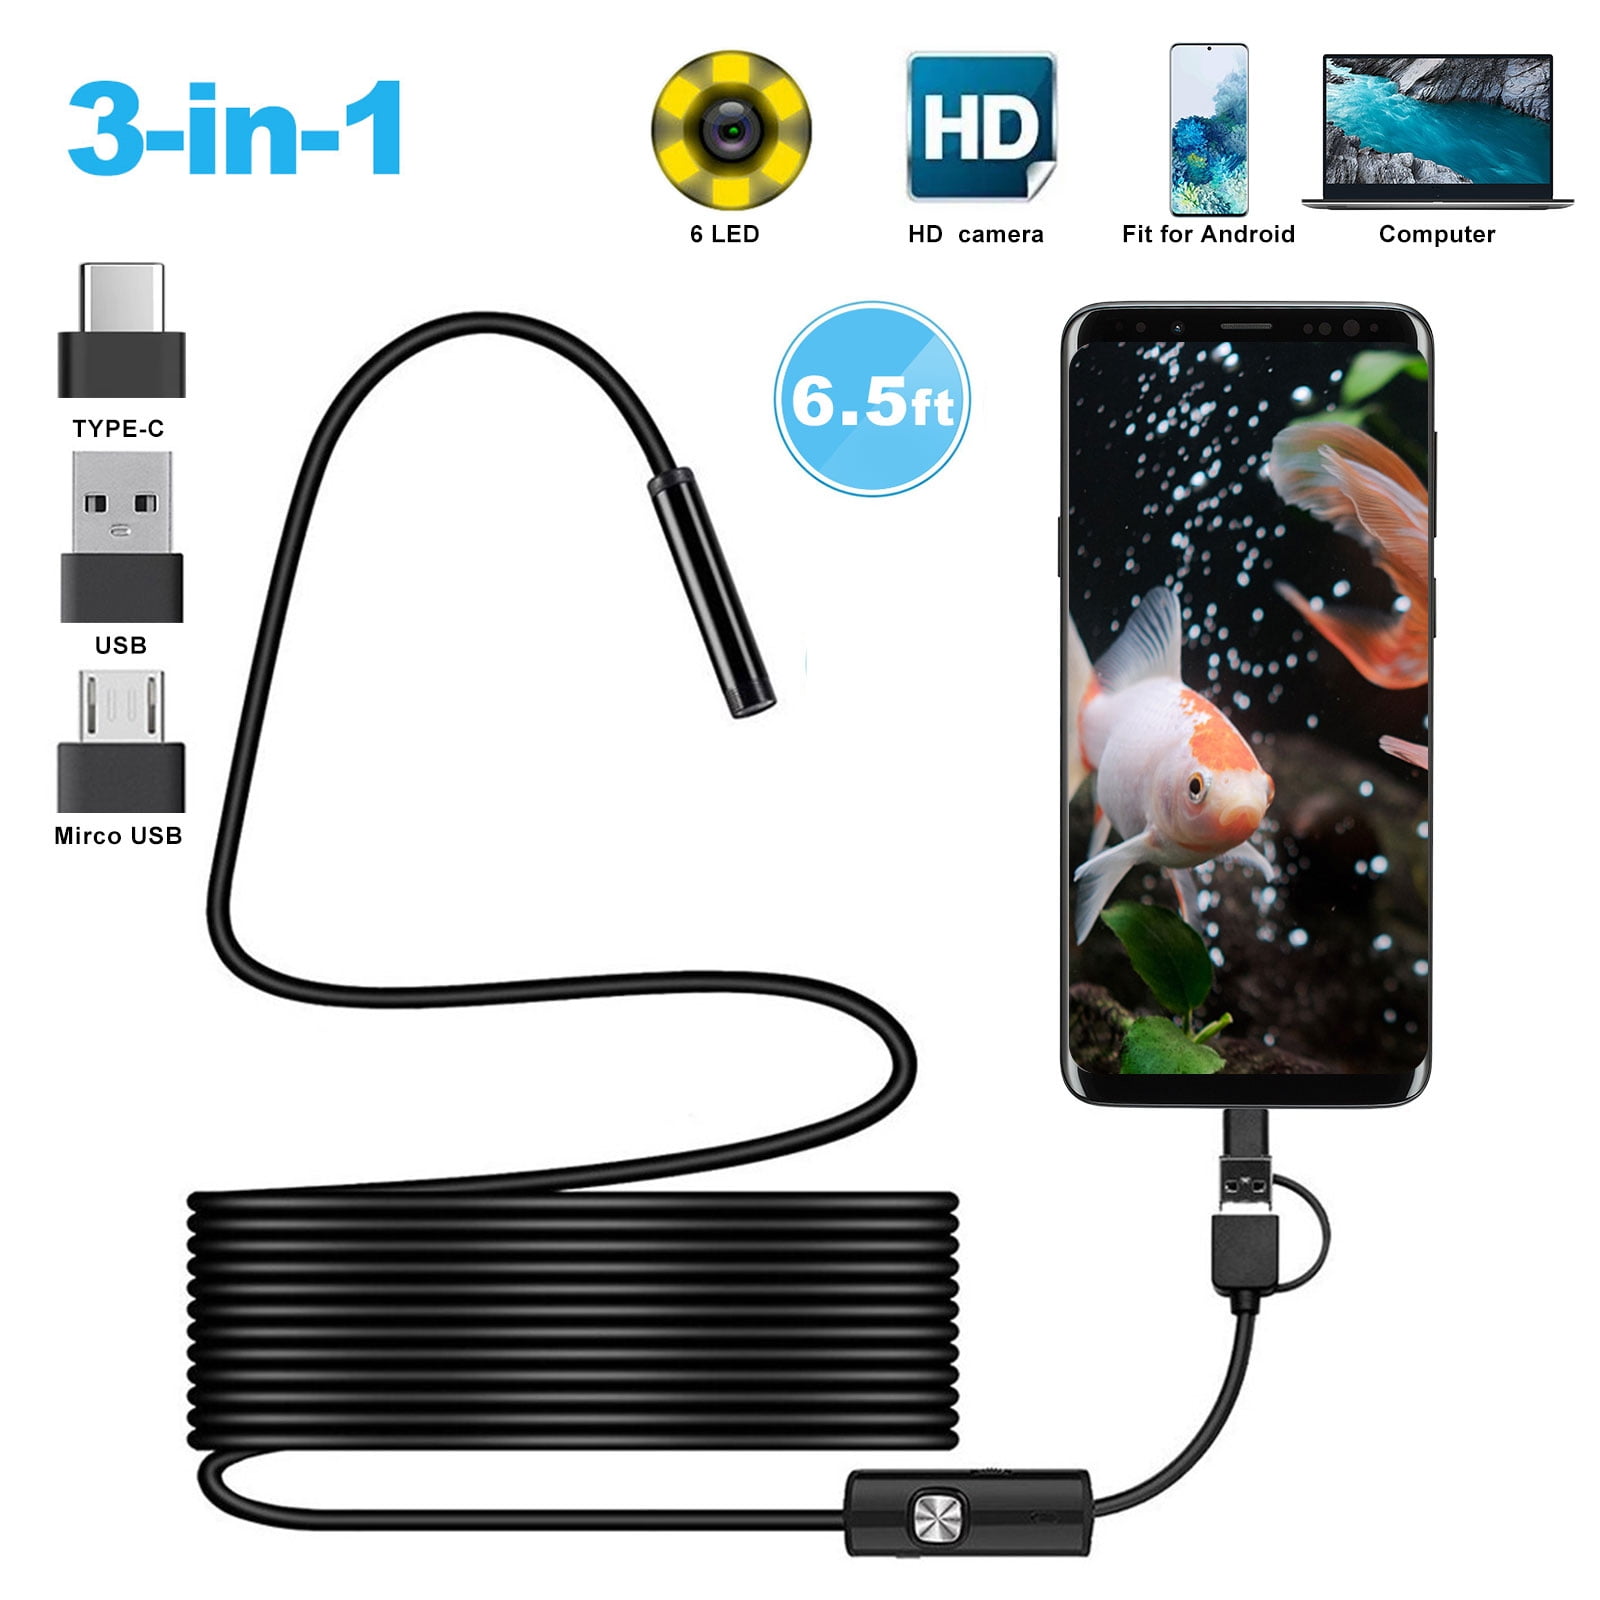 5m 6LED Android Endoscope Waterproof Inspection Camera USB Video Came WK 